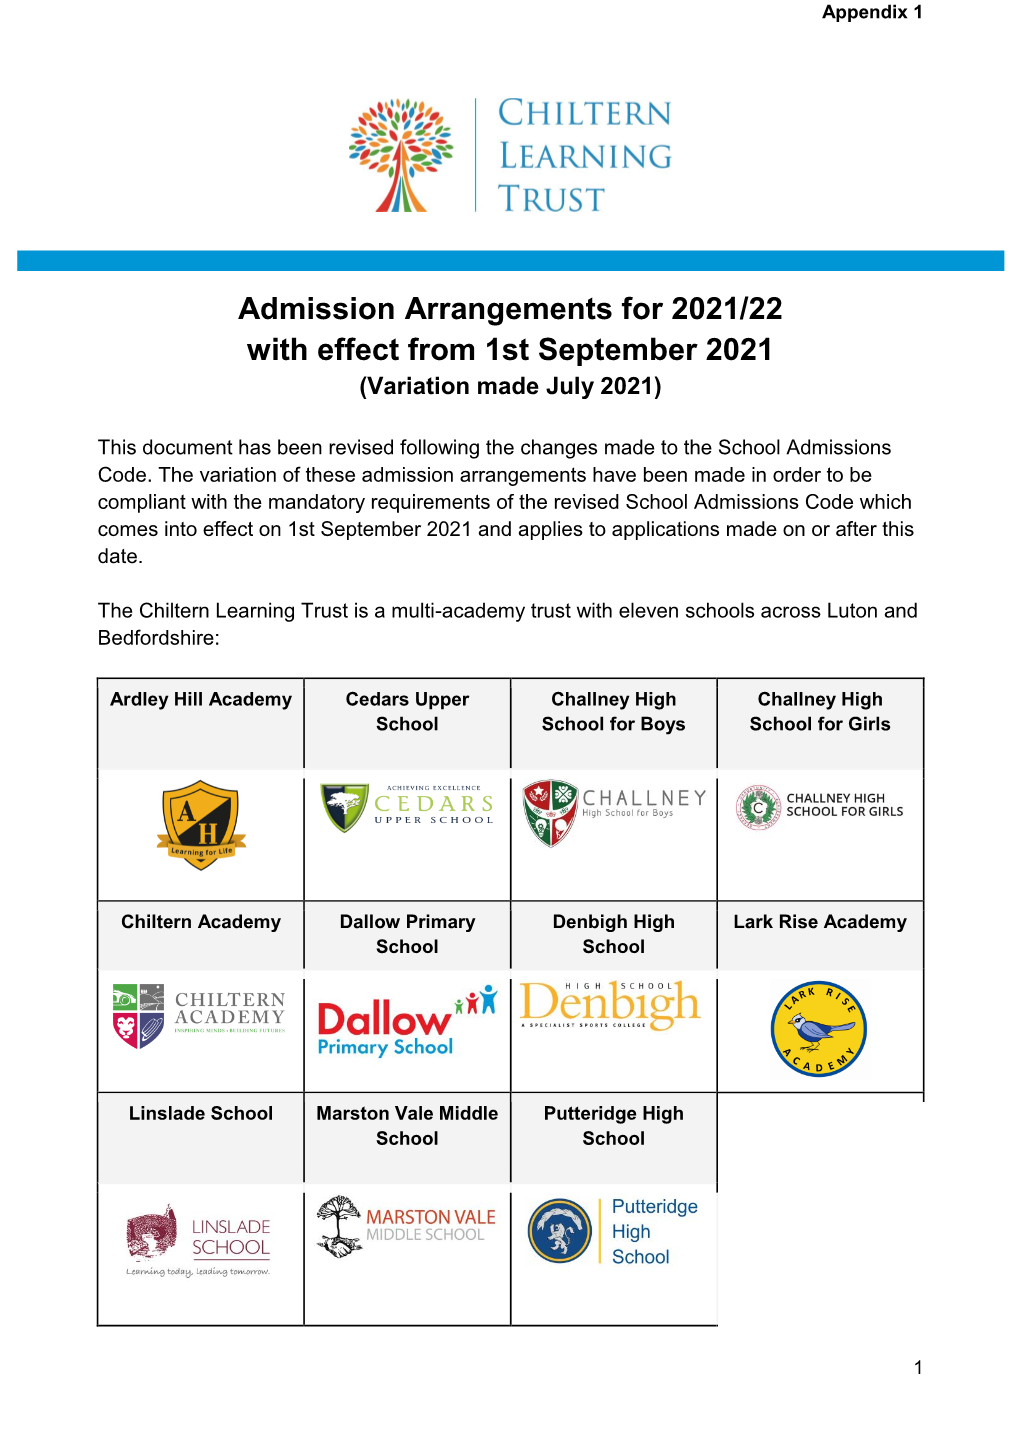 Admission Arrangements for 2021/22 with Effect from 1St September 2021 (Variation Made July 2021)